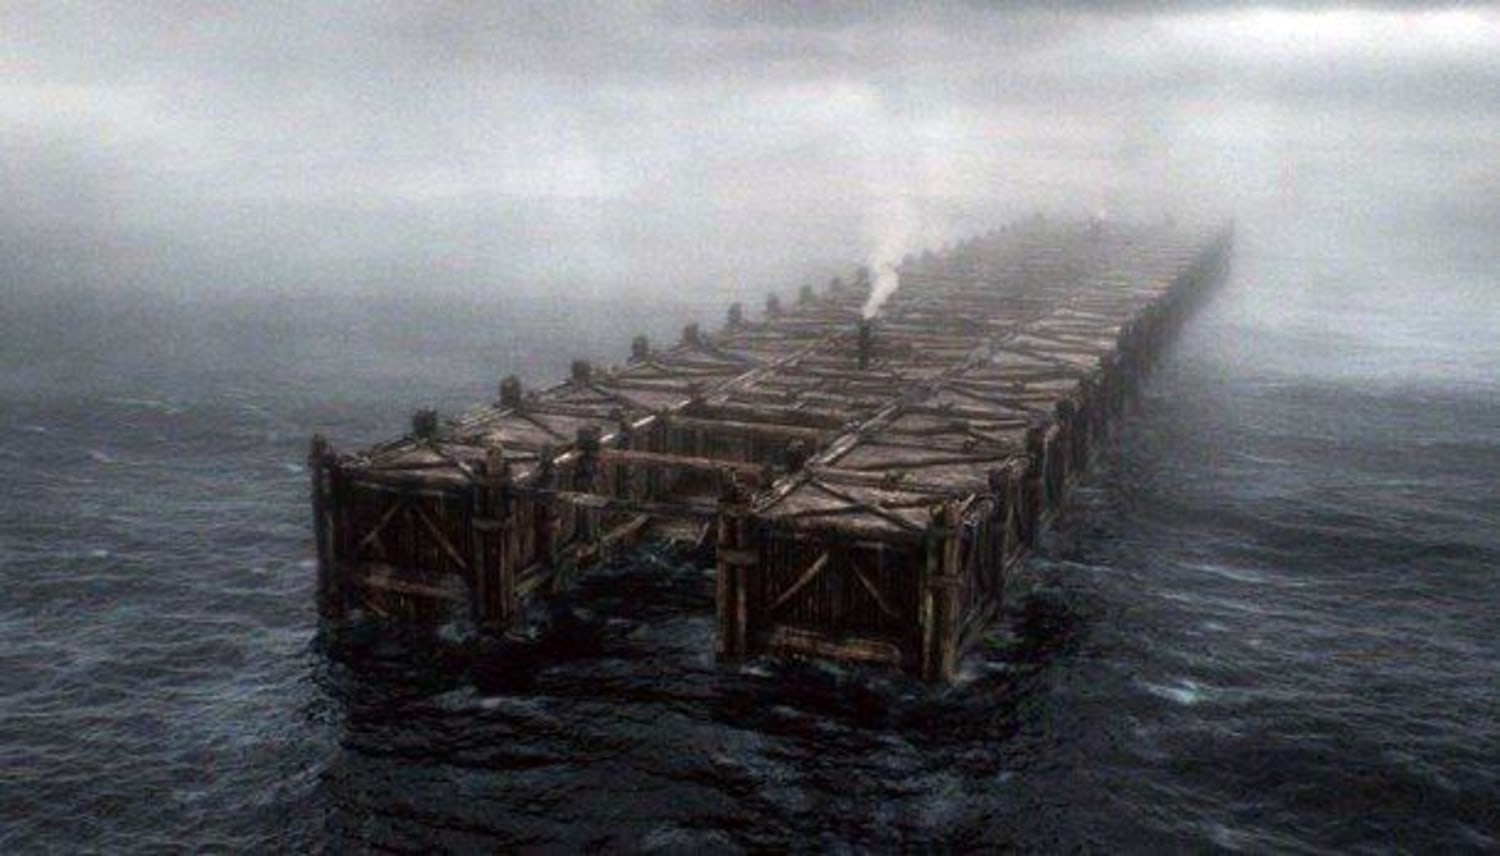 God Intends to Destroy the World With a Flood and Instructs Noah to Build an Ark